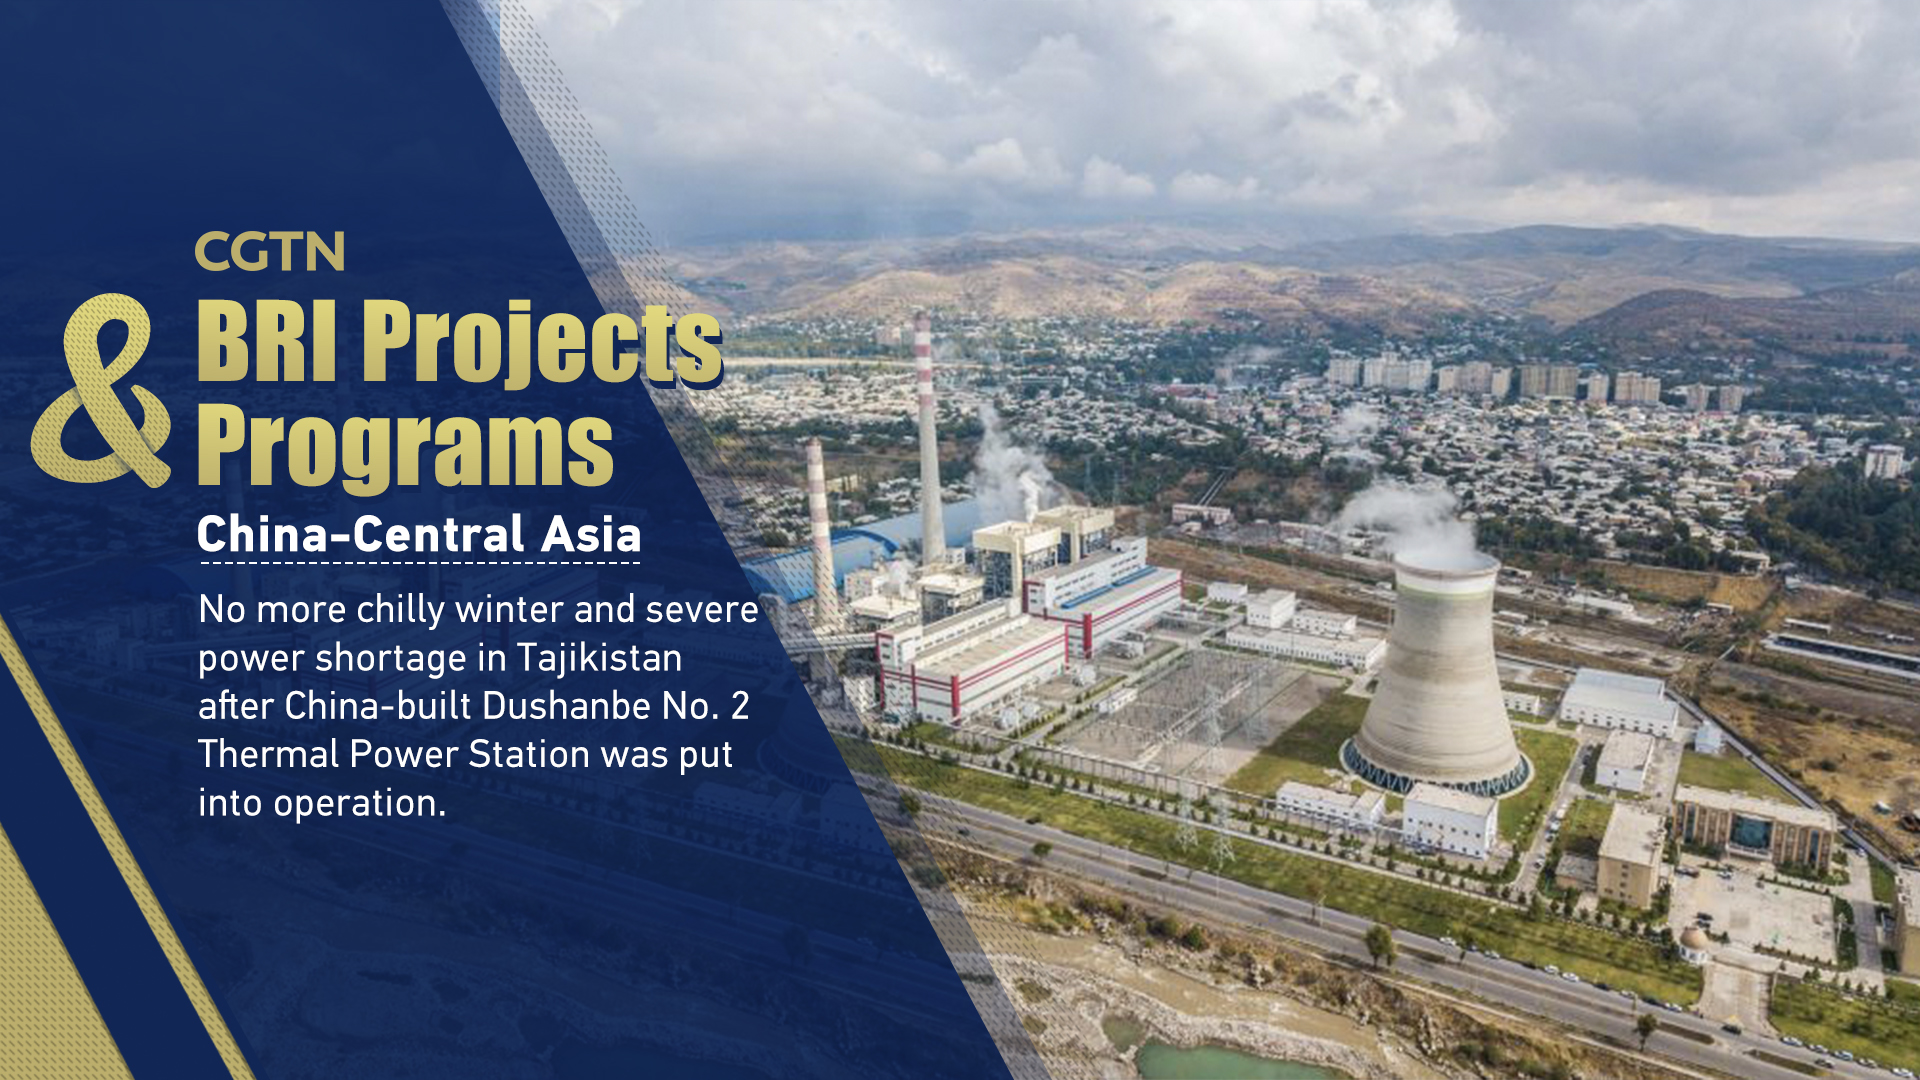 China-Central Asia: Thermal power, no more chilly winter in Tajikistan